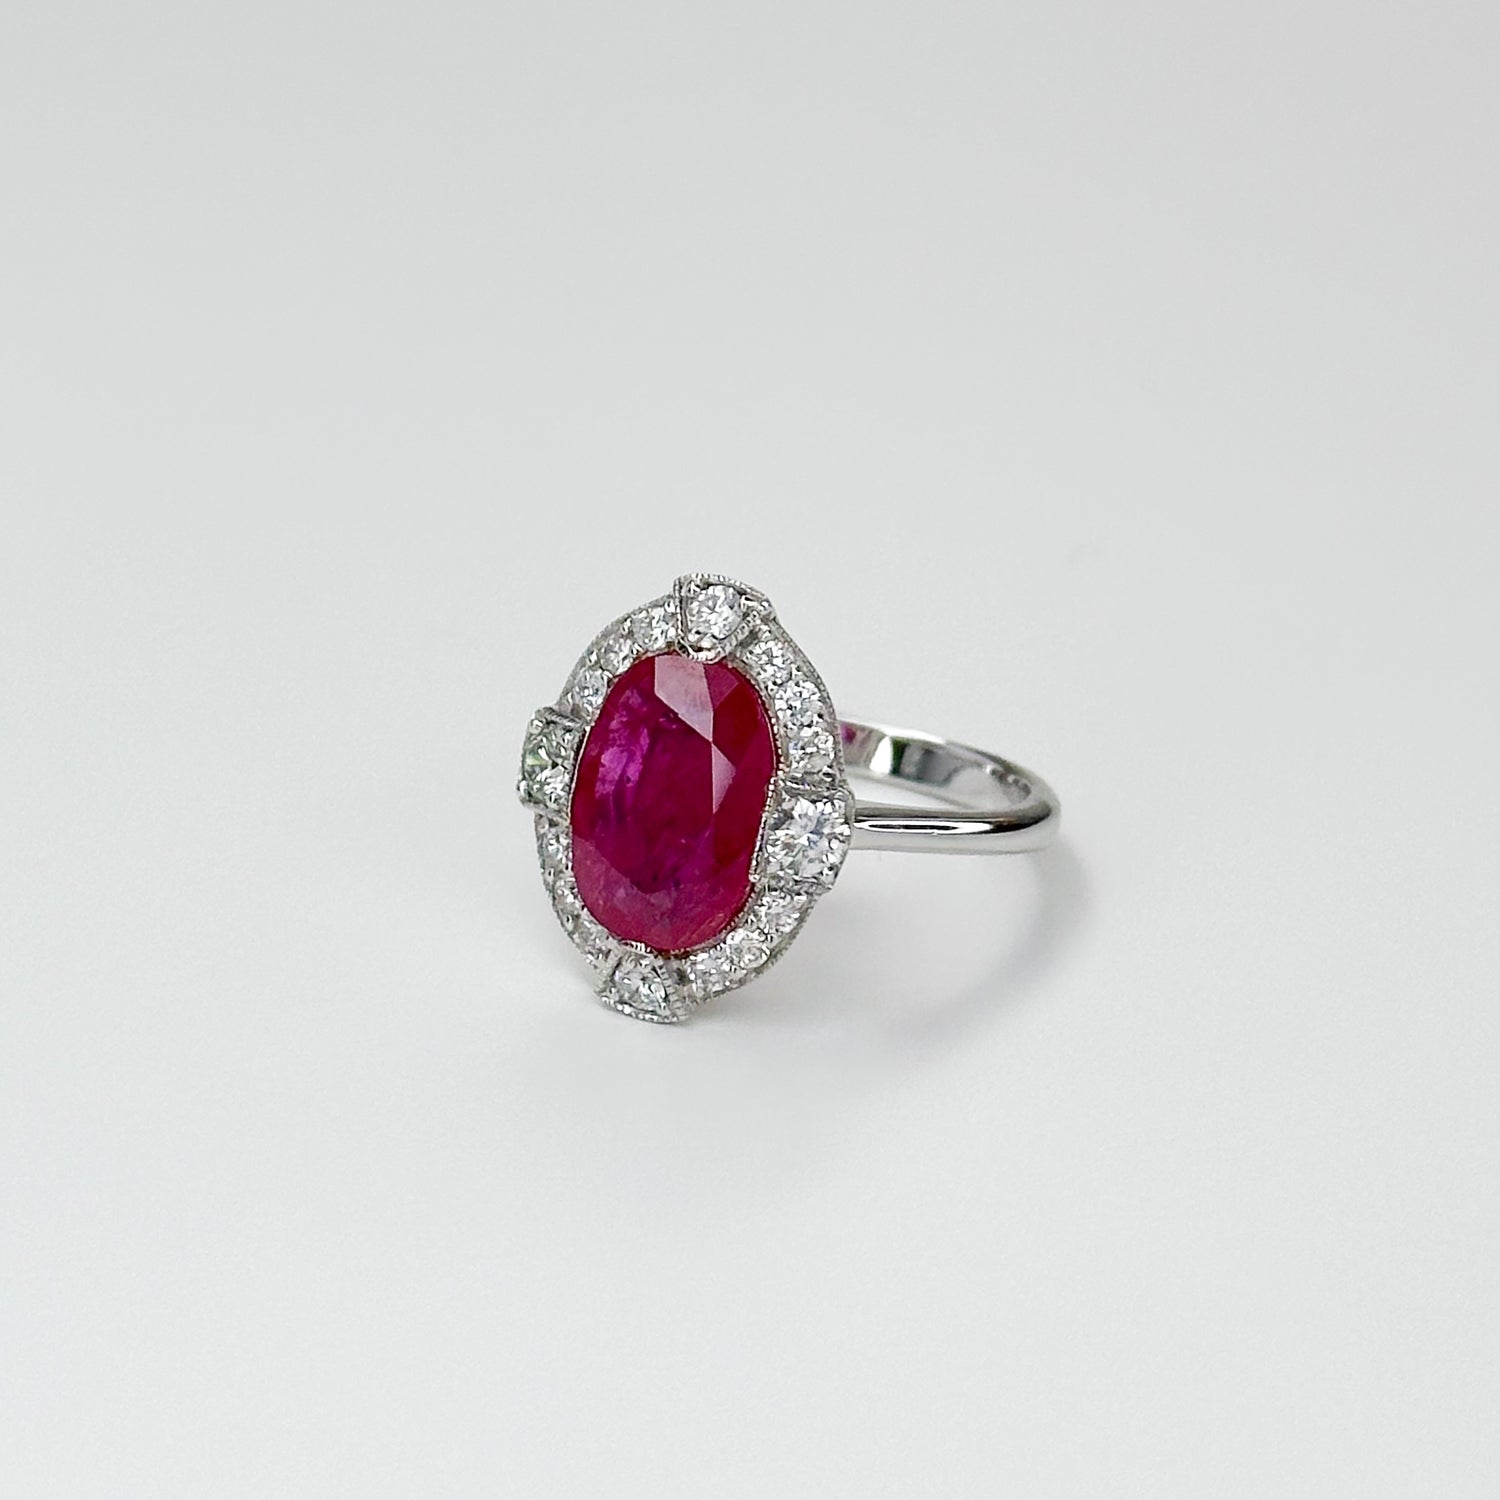 3.23ct Oval Cut Ruby Ring with Diamond Halo